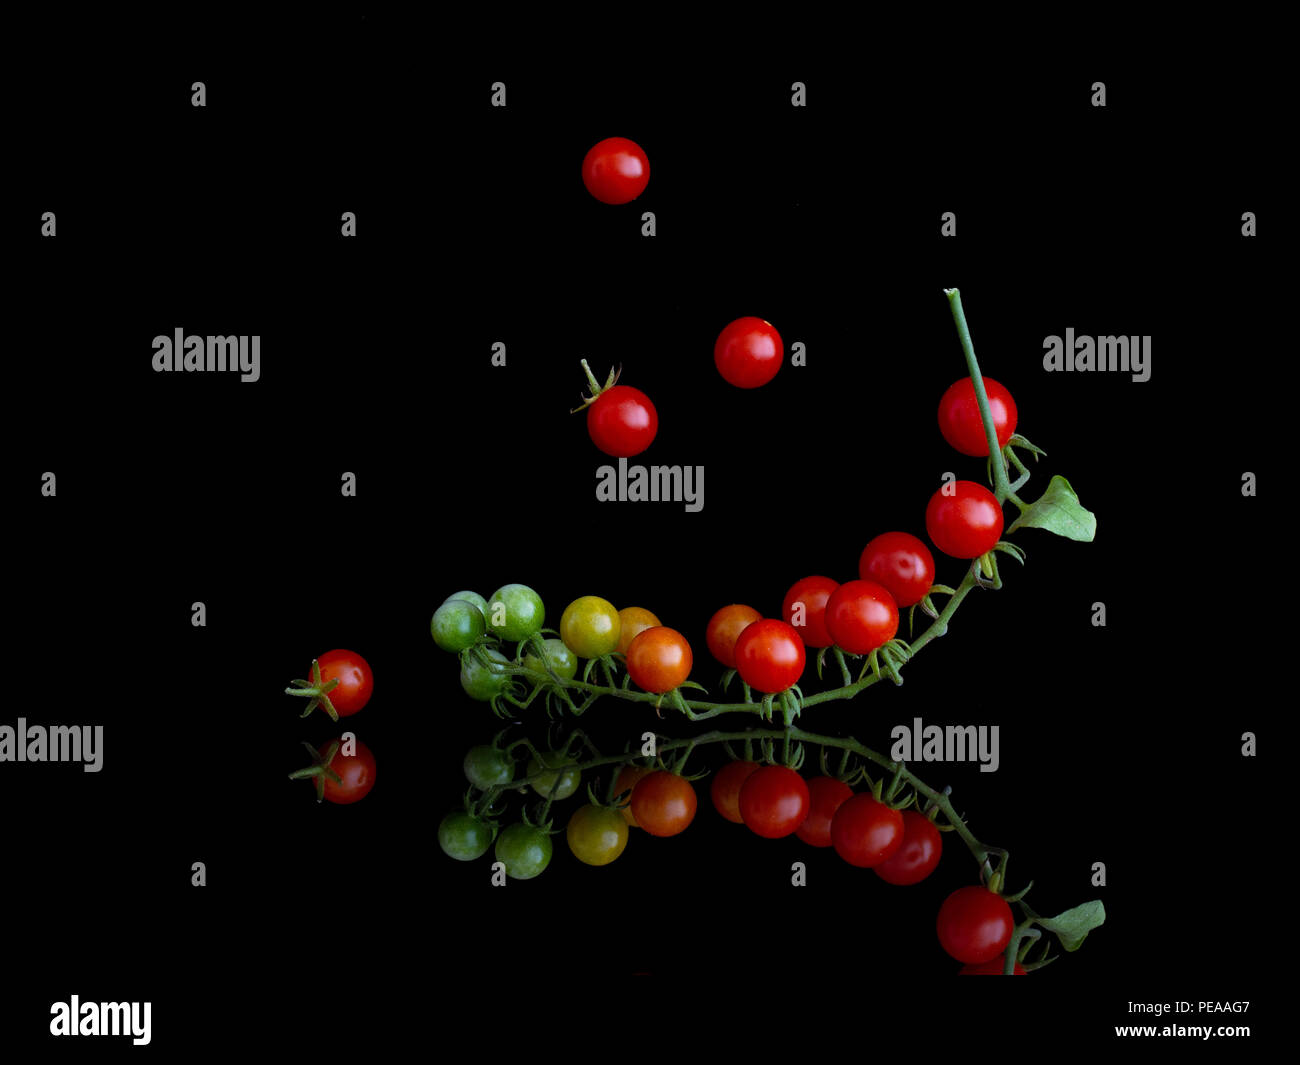 Cluster of tiny red currant tomatoes on vine , Solanum pimpinellifolium, on shiny surface and isolated on black. Stock Photo